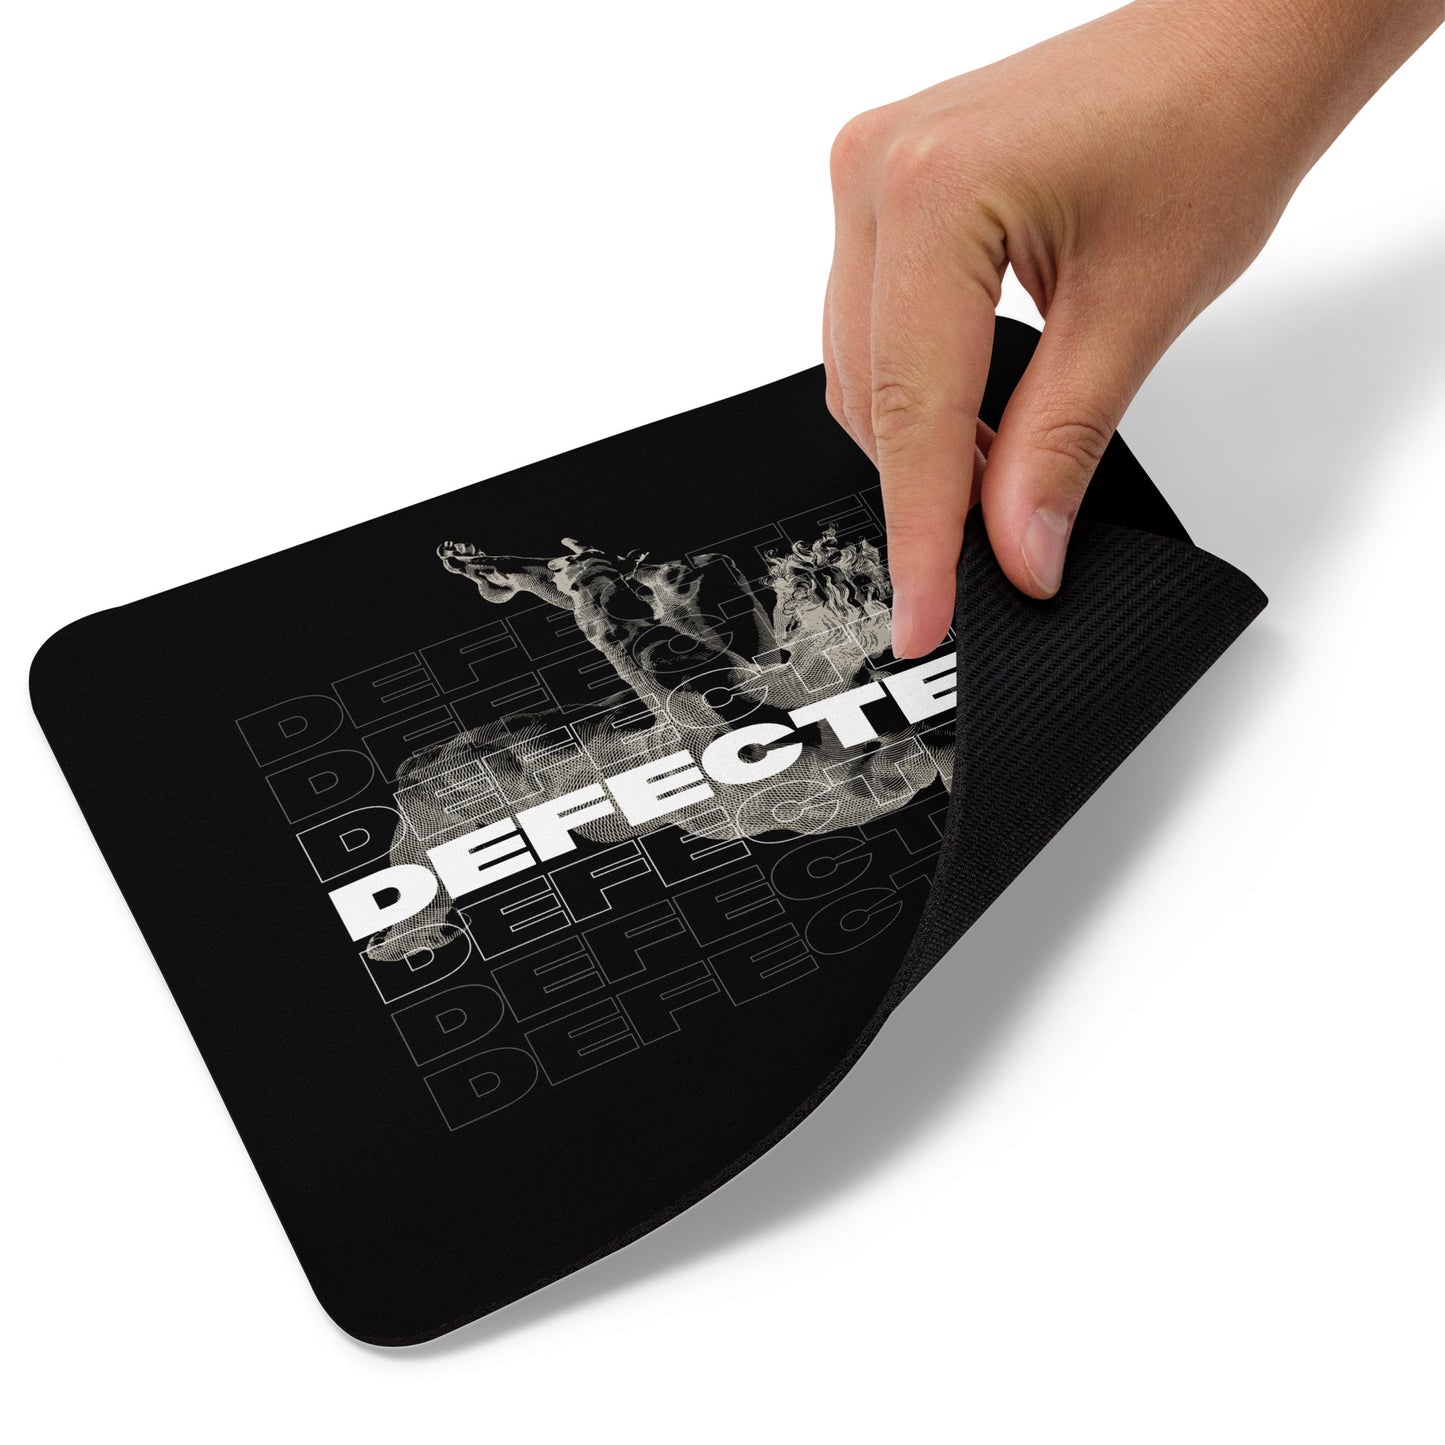 Defected Mouse Pad